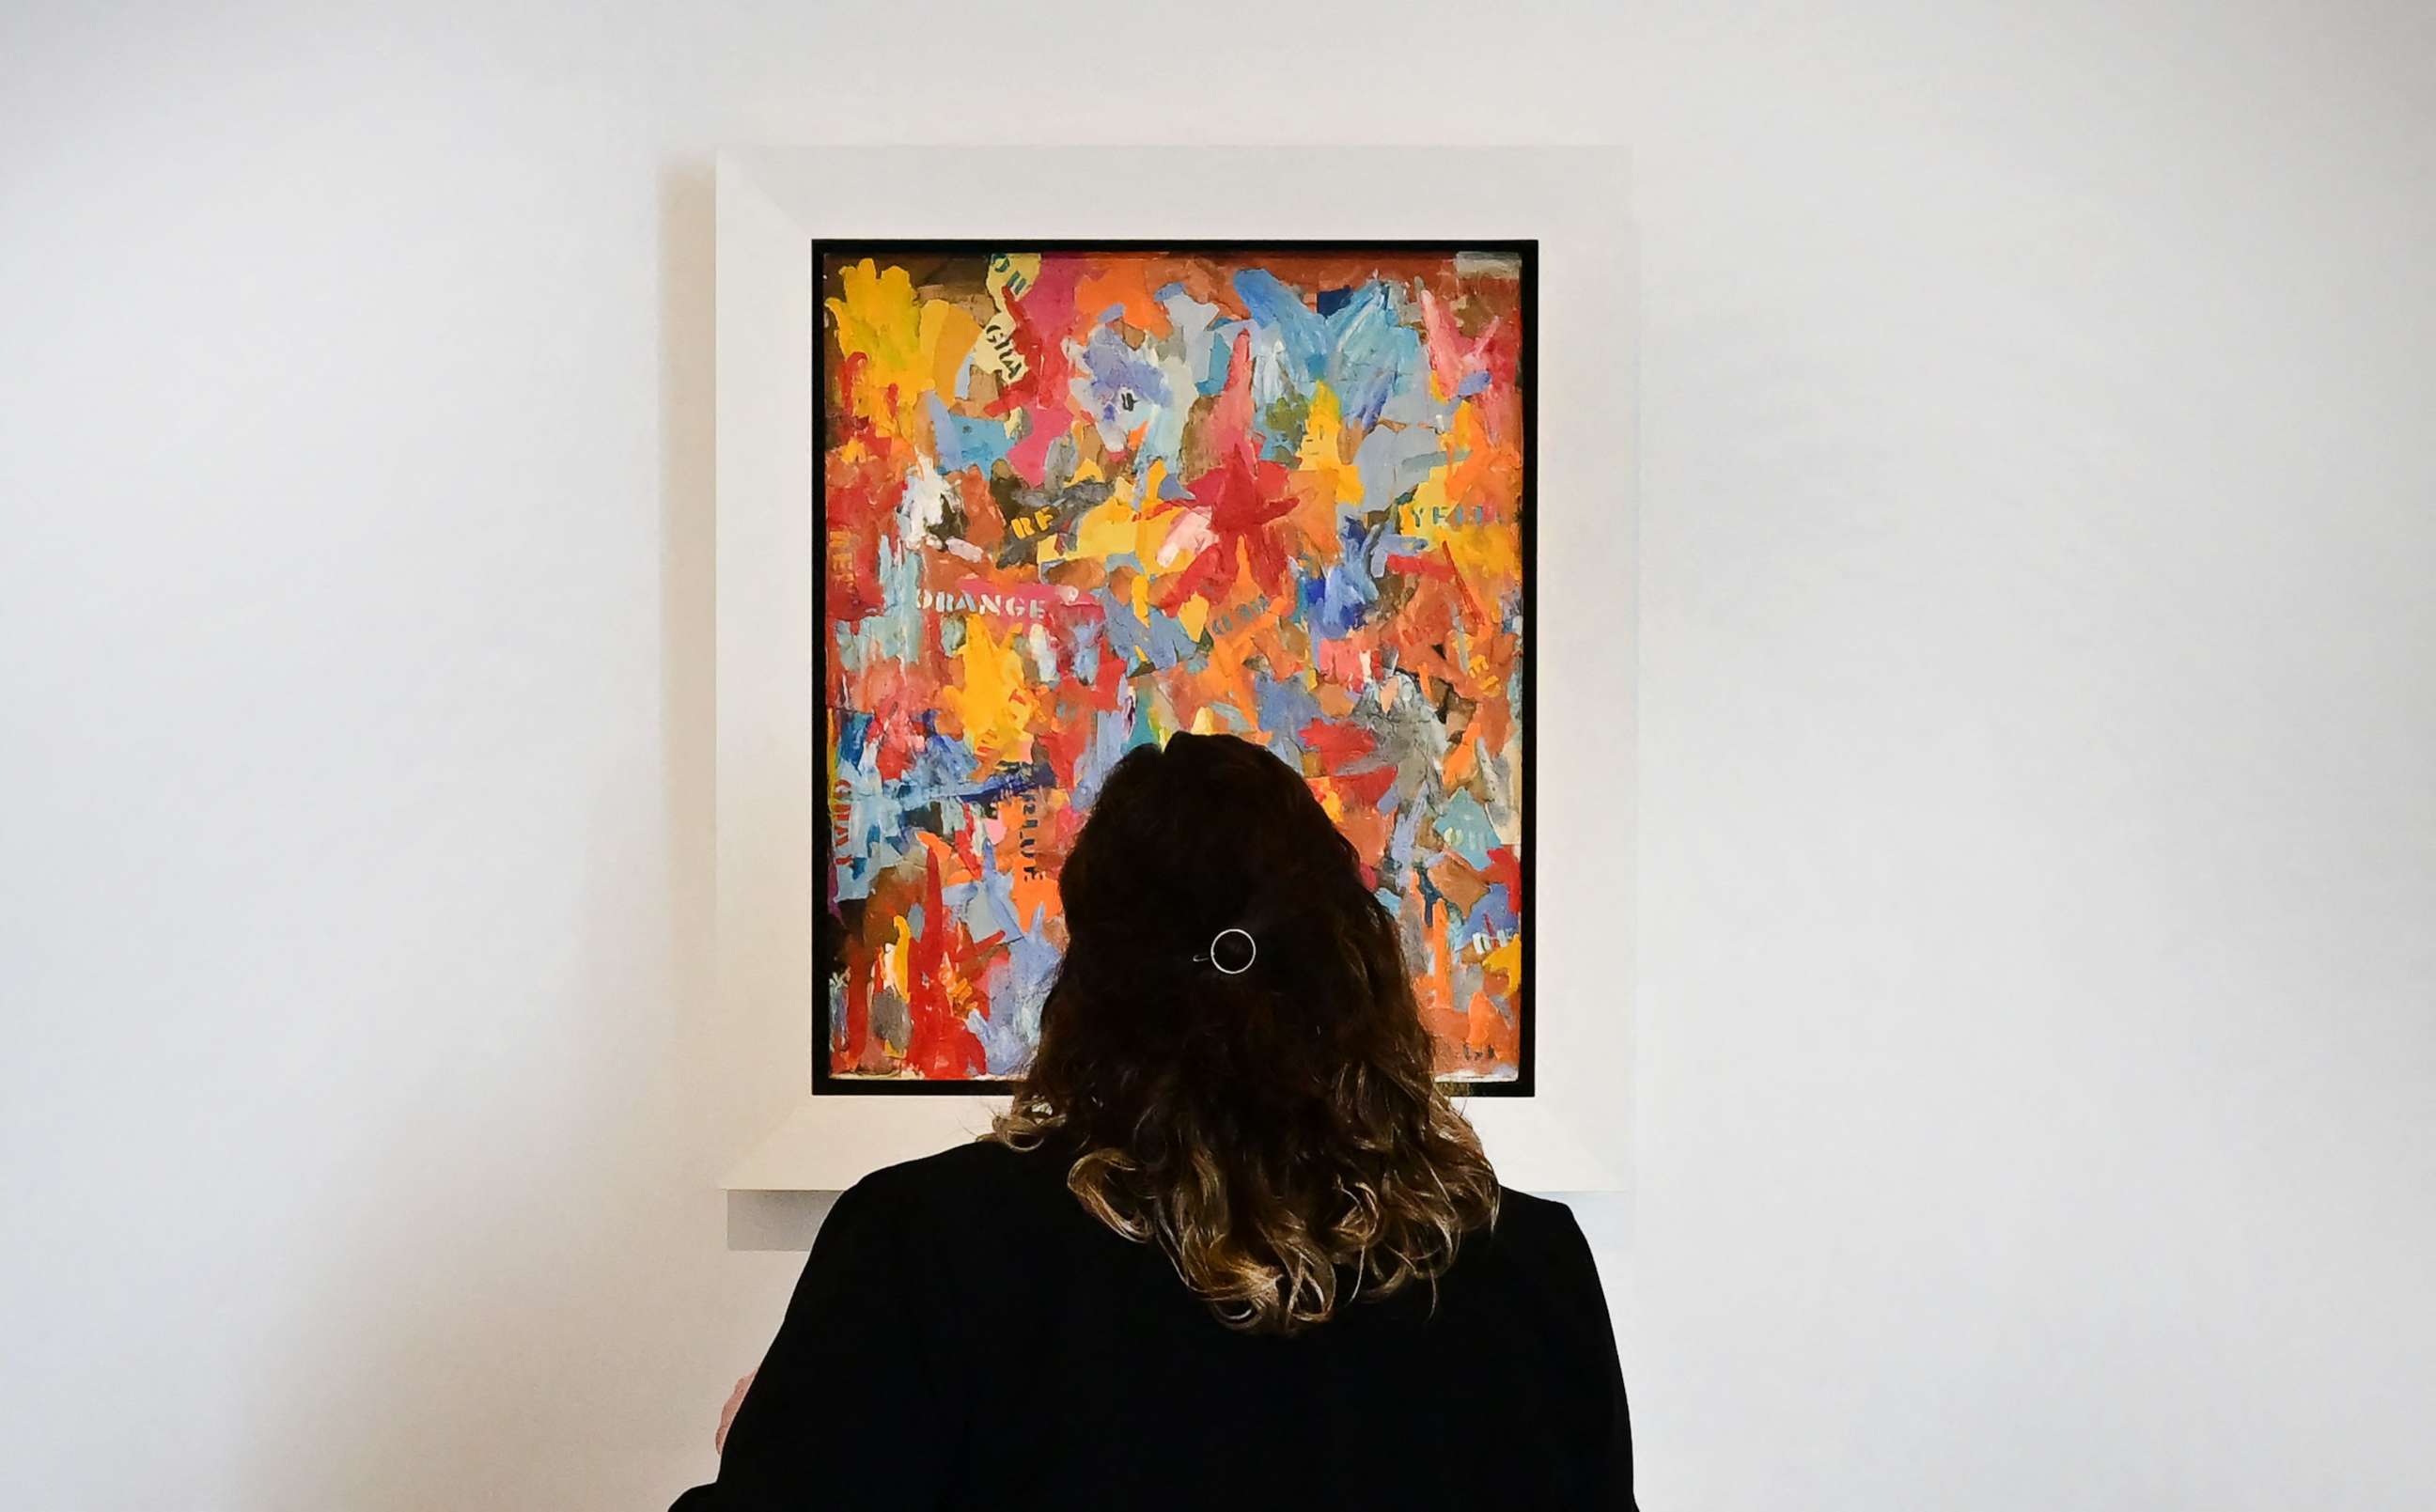 PHOTO: A woman views "Small False Start" by Jasper Johns on display at Christie's Los Angeles on October 12, 2022 in Beverly Hills, California during the media preview of "Visionary: The Paul Allen Collection."